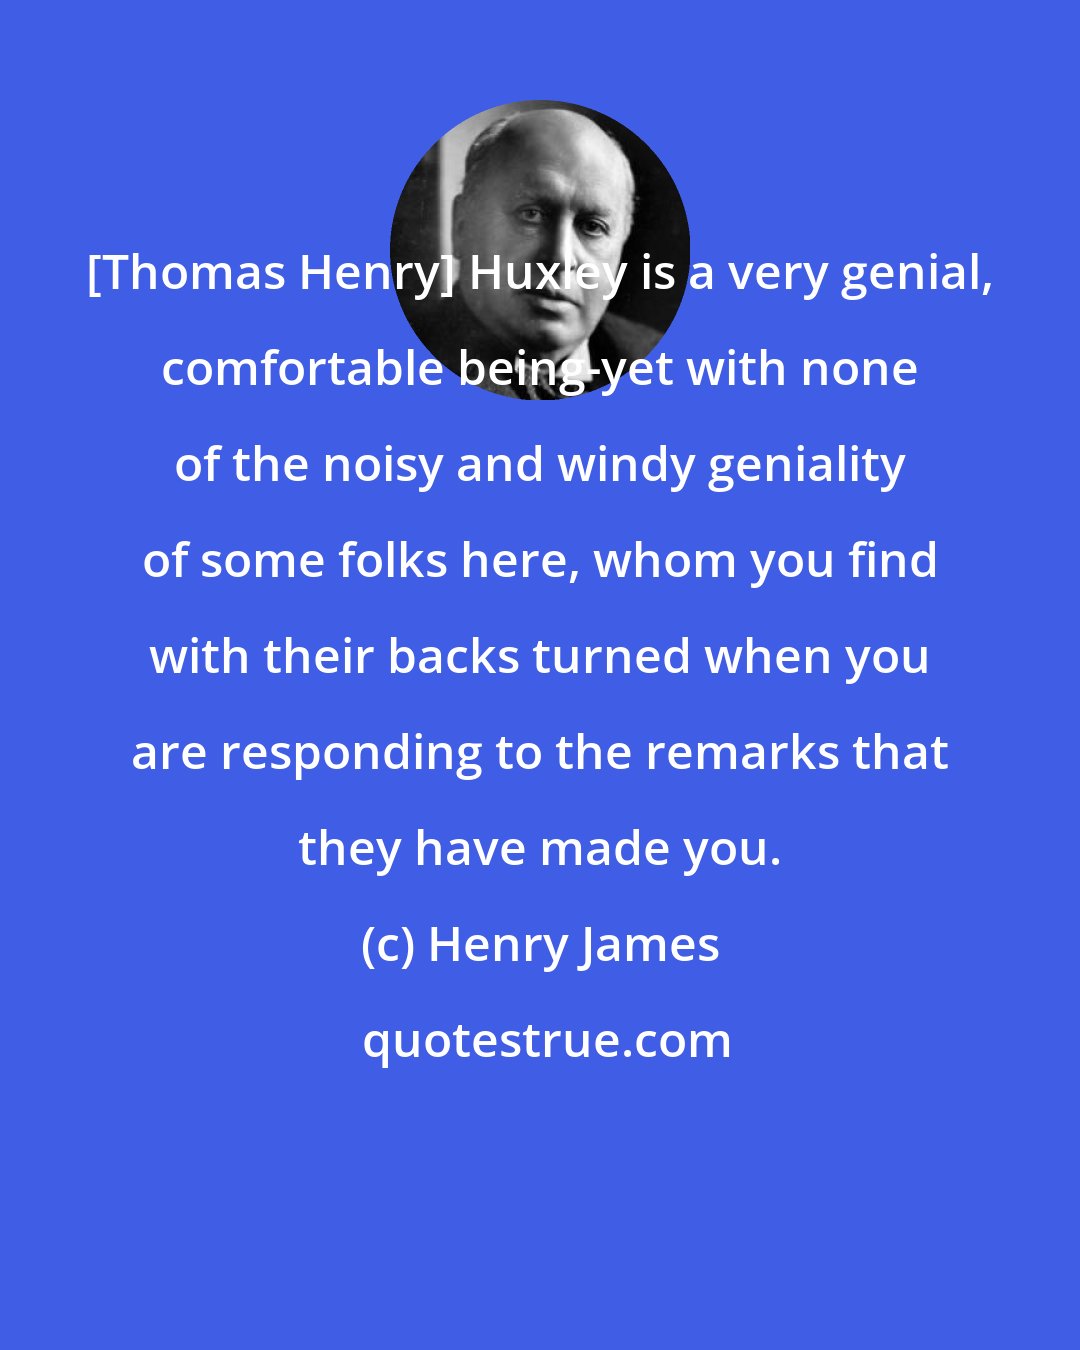 Henry James: [Thomas Henry] Huxley is a very genial, comfortable being-yet with none of the noisy and windy geniality of some folks here, whom you find with their backs turned when you are responding to the remarks that they have made you.